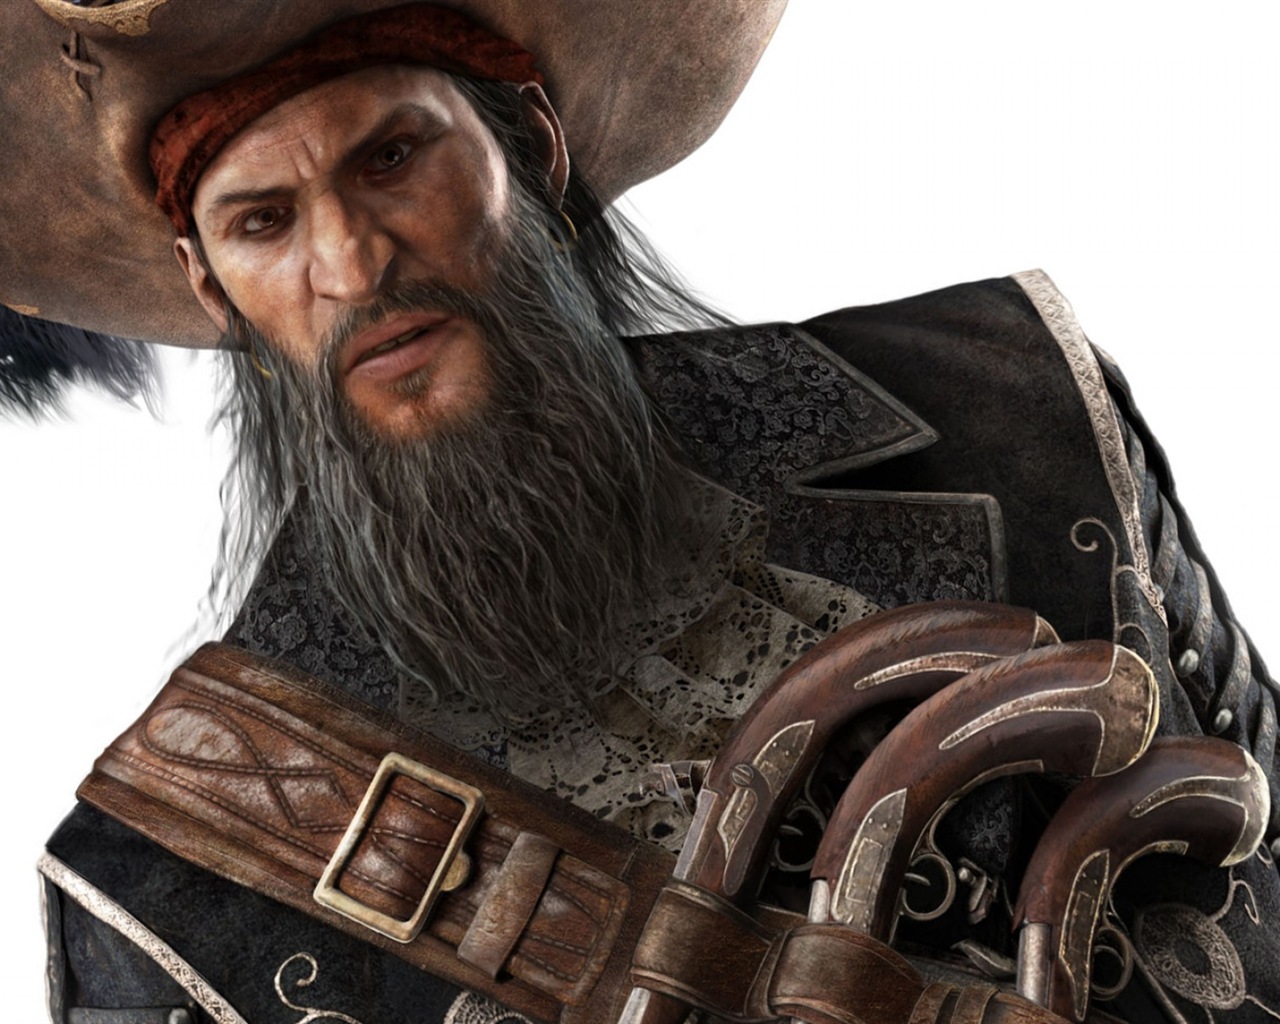 Creed IV Assassin: Black Flag HD wallpapers #11 - 1280x1024